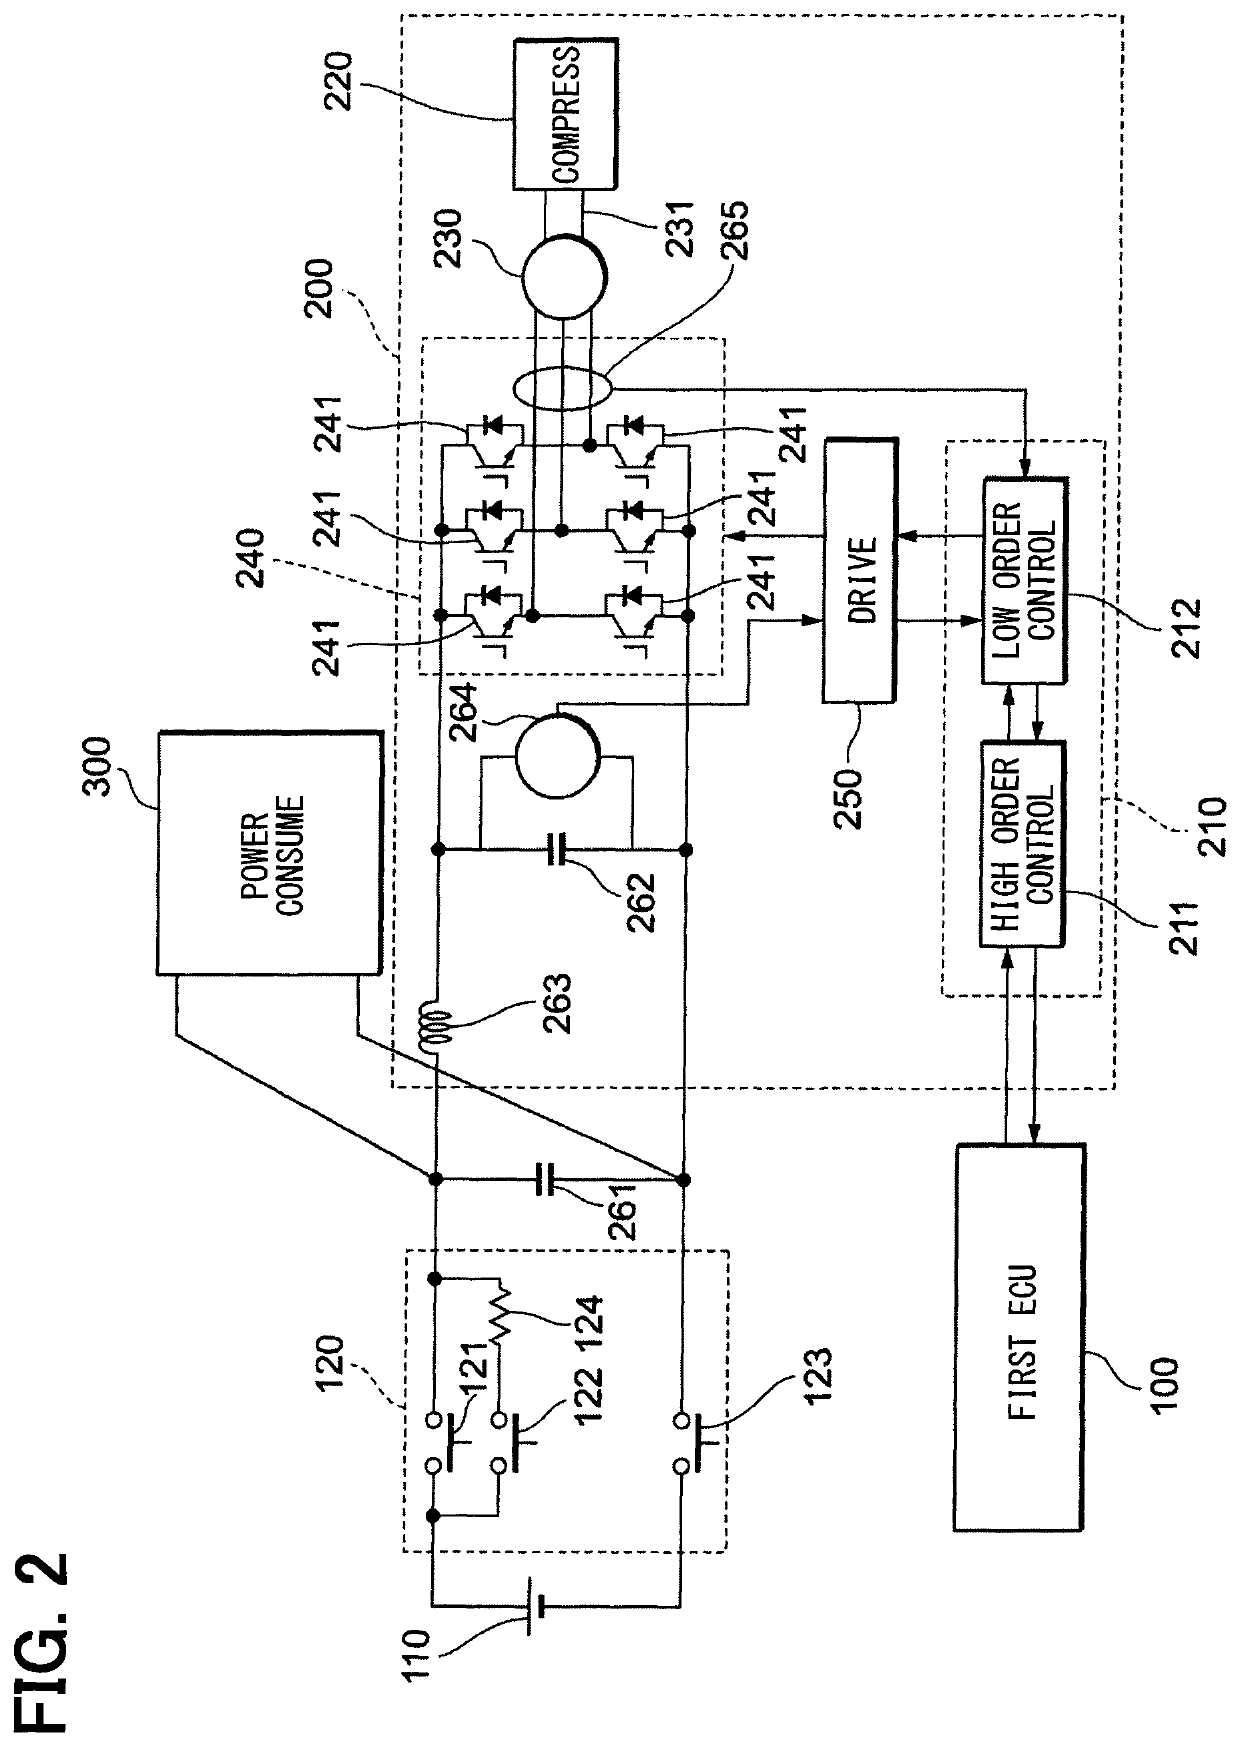 Power control system for electric vehicle